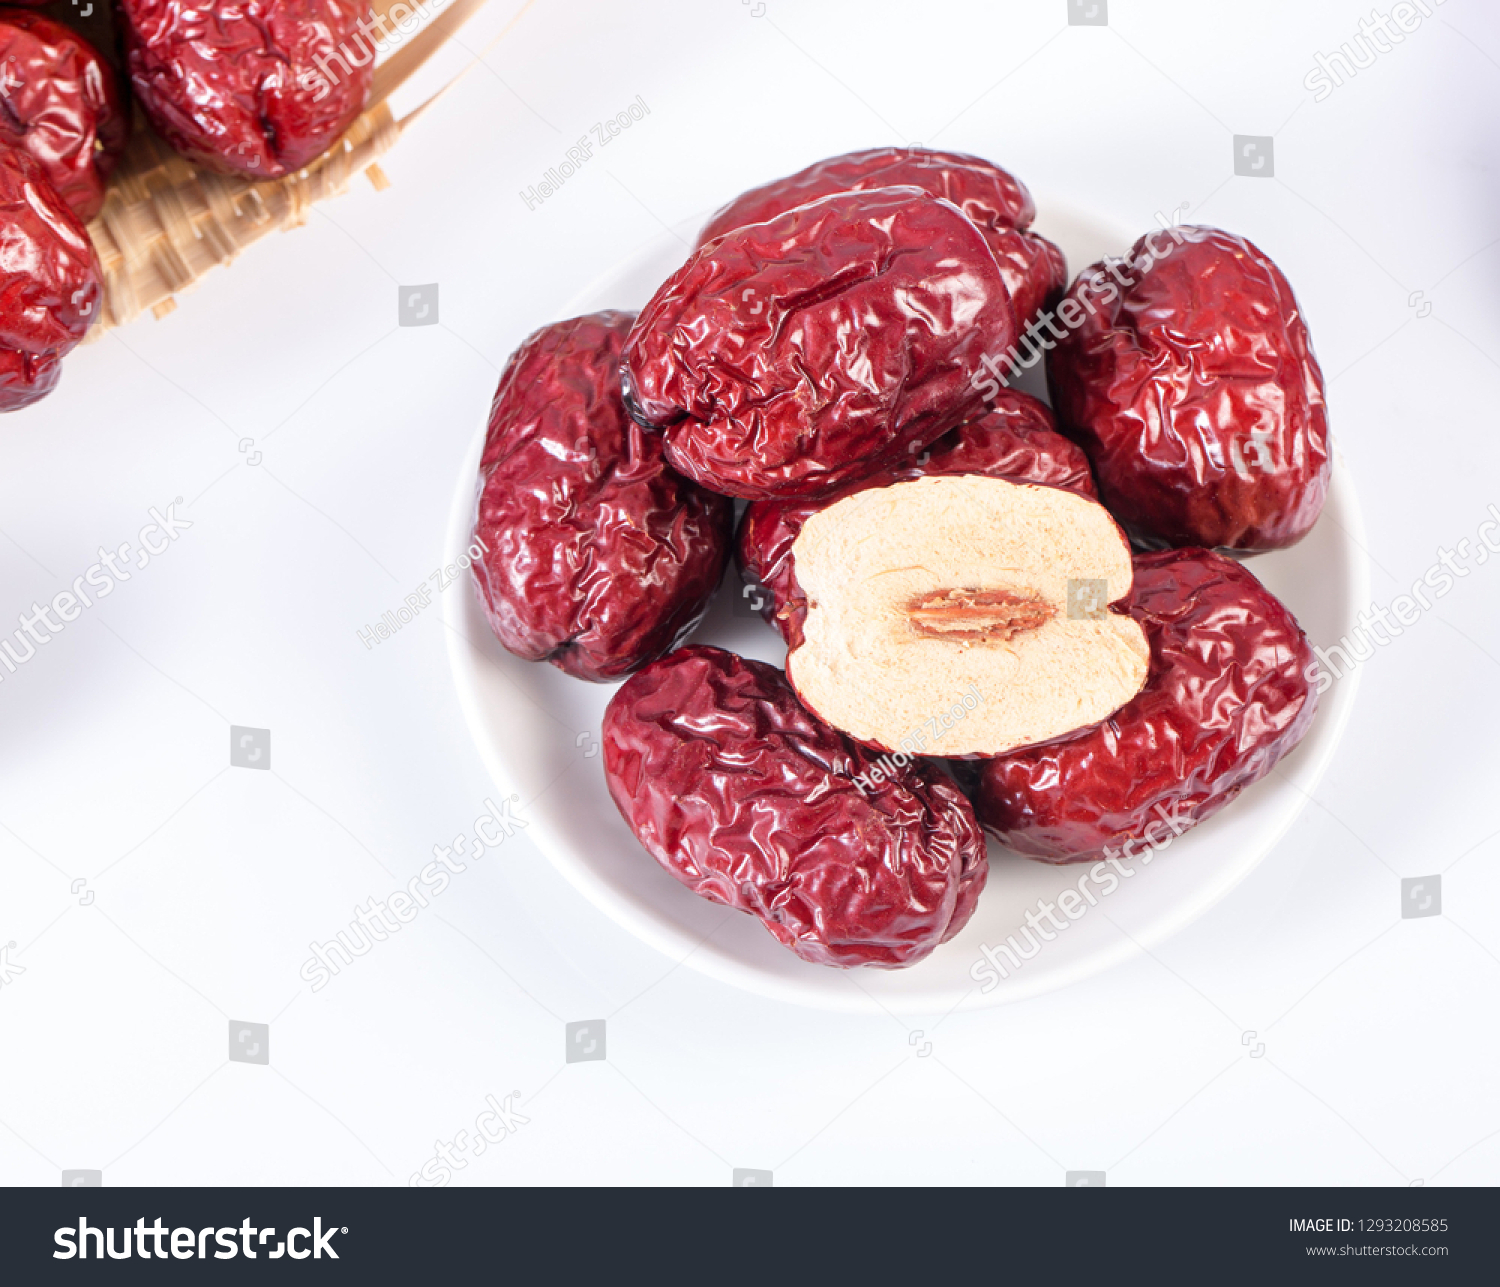 Dried dates, dried dates, dried fruit food #1293208585